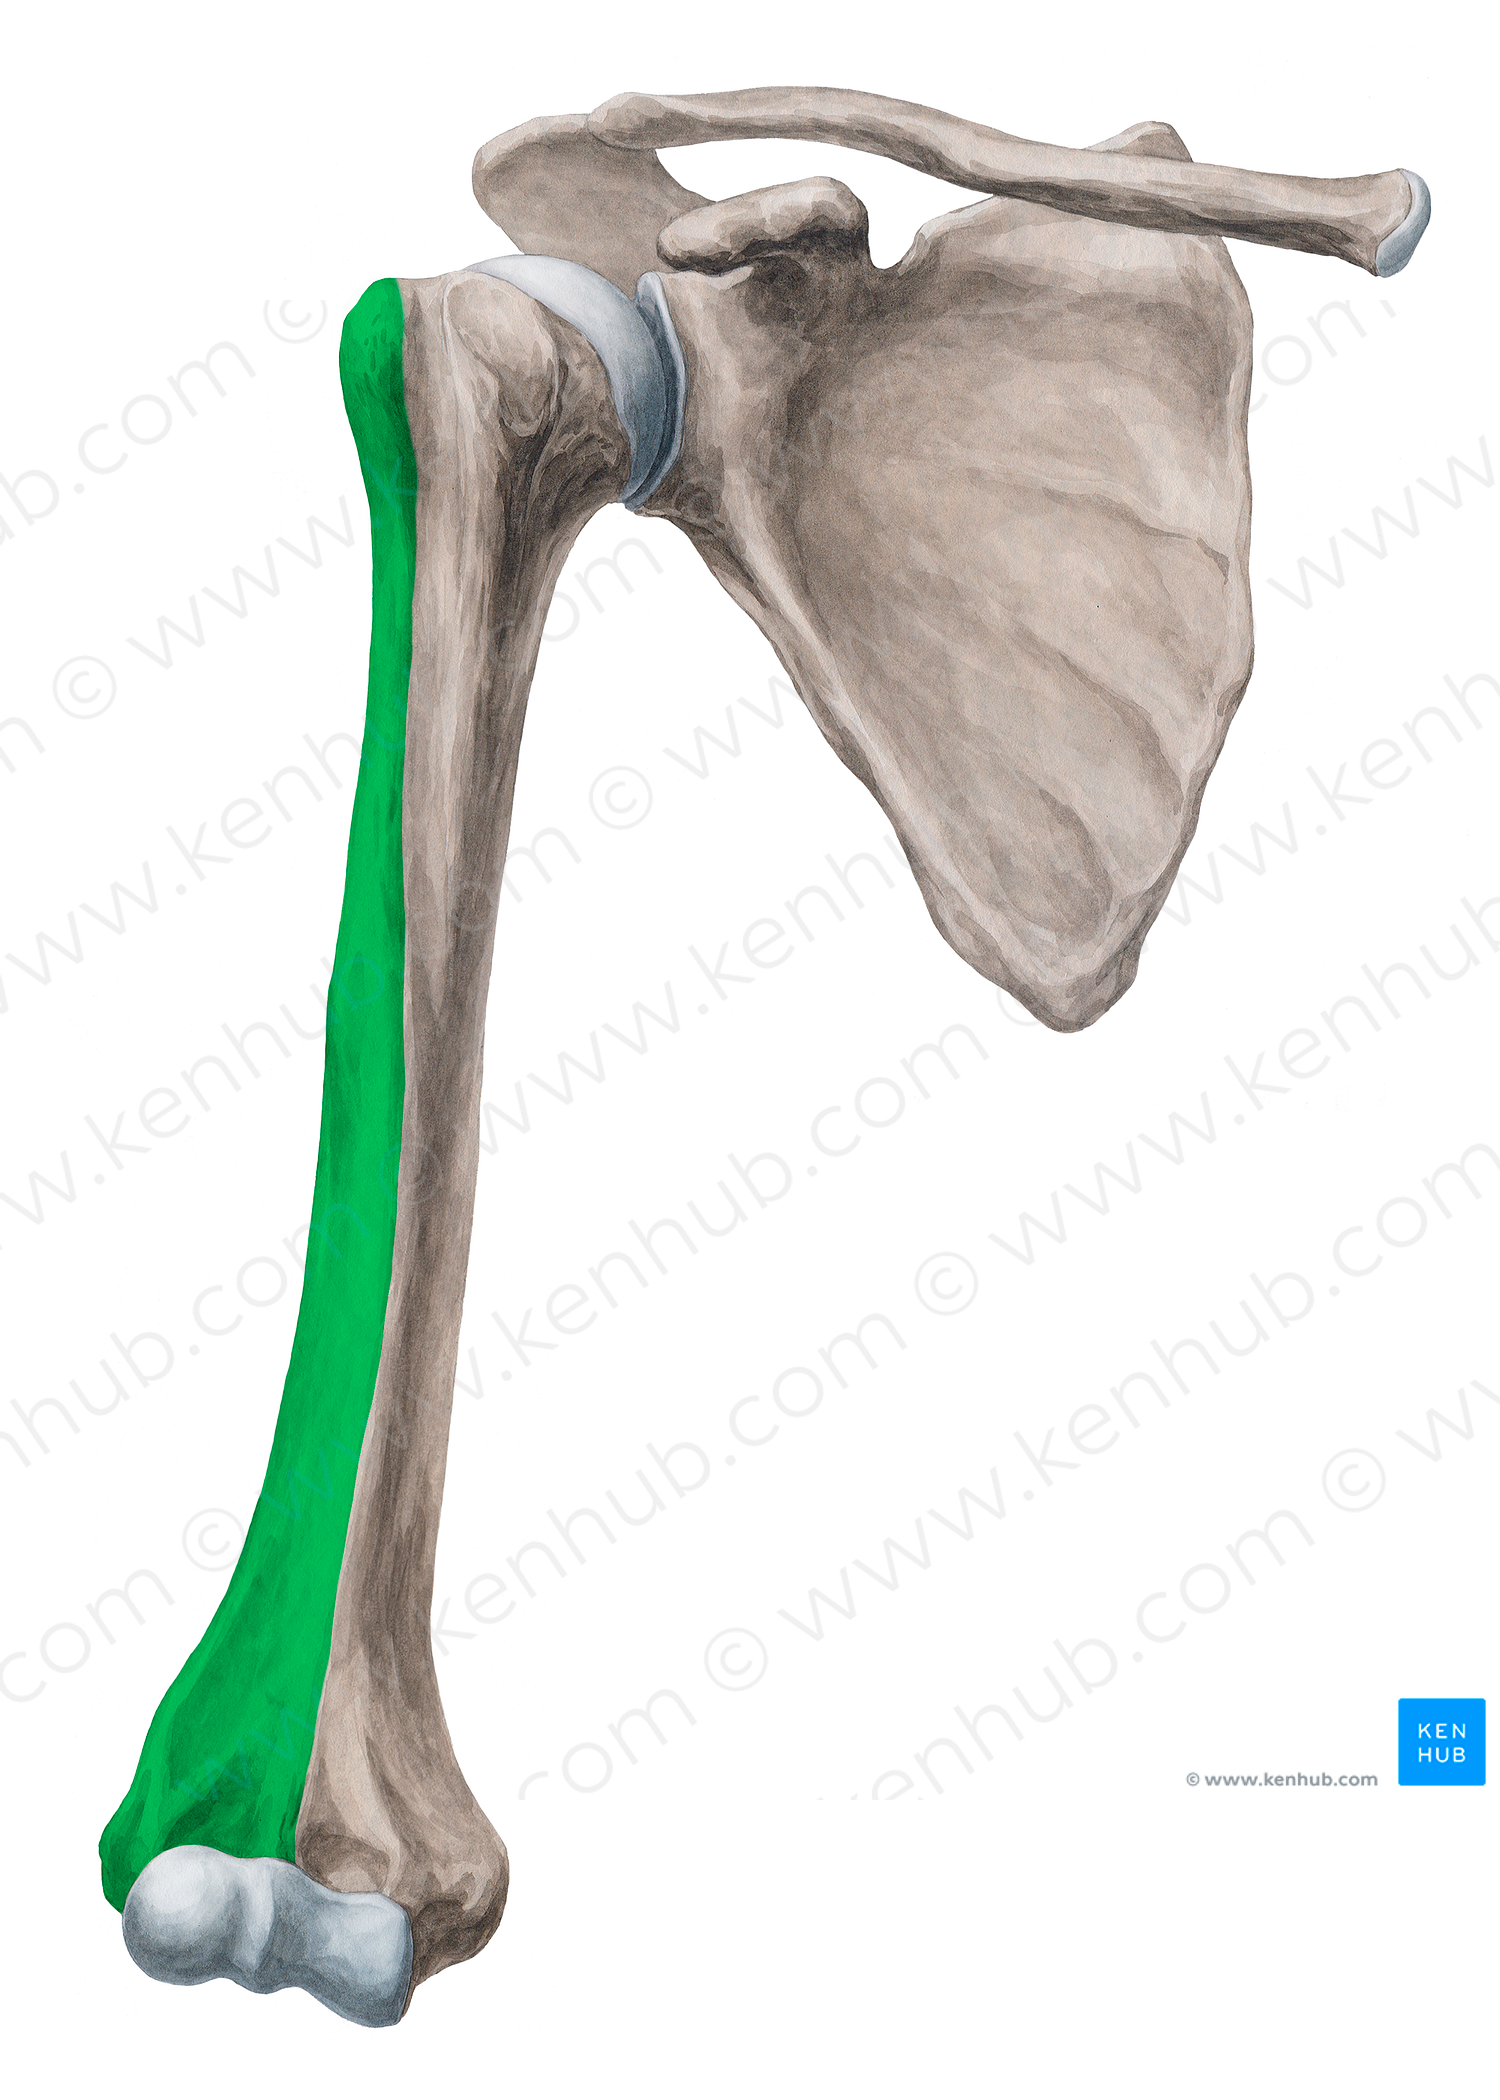 Anterolateral surface of humerus (#19937)